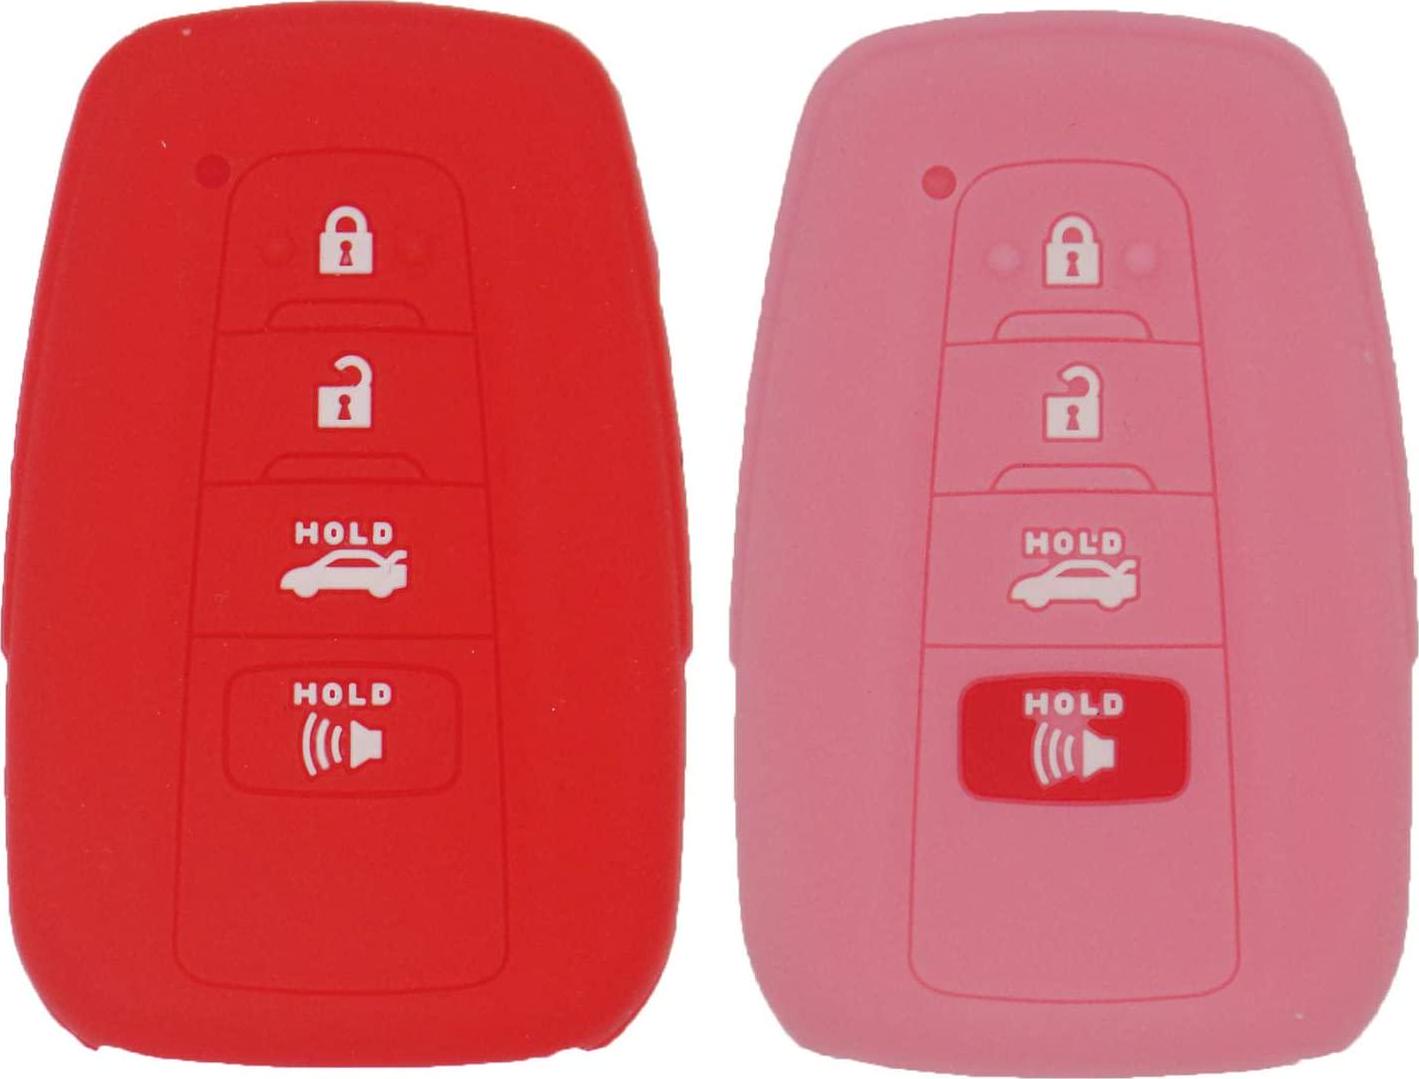 LemSa, LemSa 2Pcs 4 Buttons Key Fob Rubber Cover Case Remote Keyless Silicone Protector Bag Holder Compatible with Toyota Camry C-HR Prius RAV4 Avalon Corolla 2017 2018 2019 2020 HYQ14FBC, Red Pink